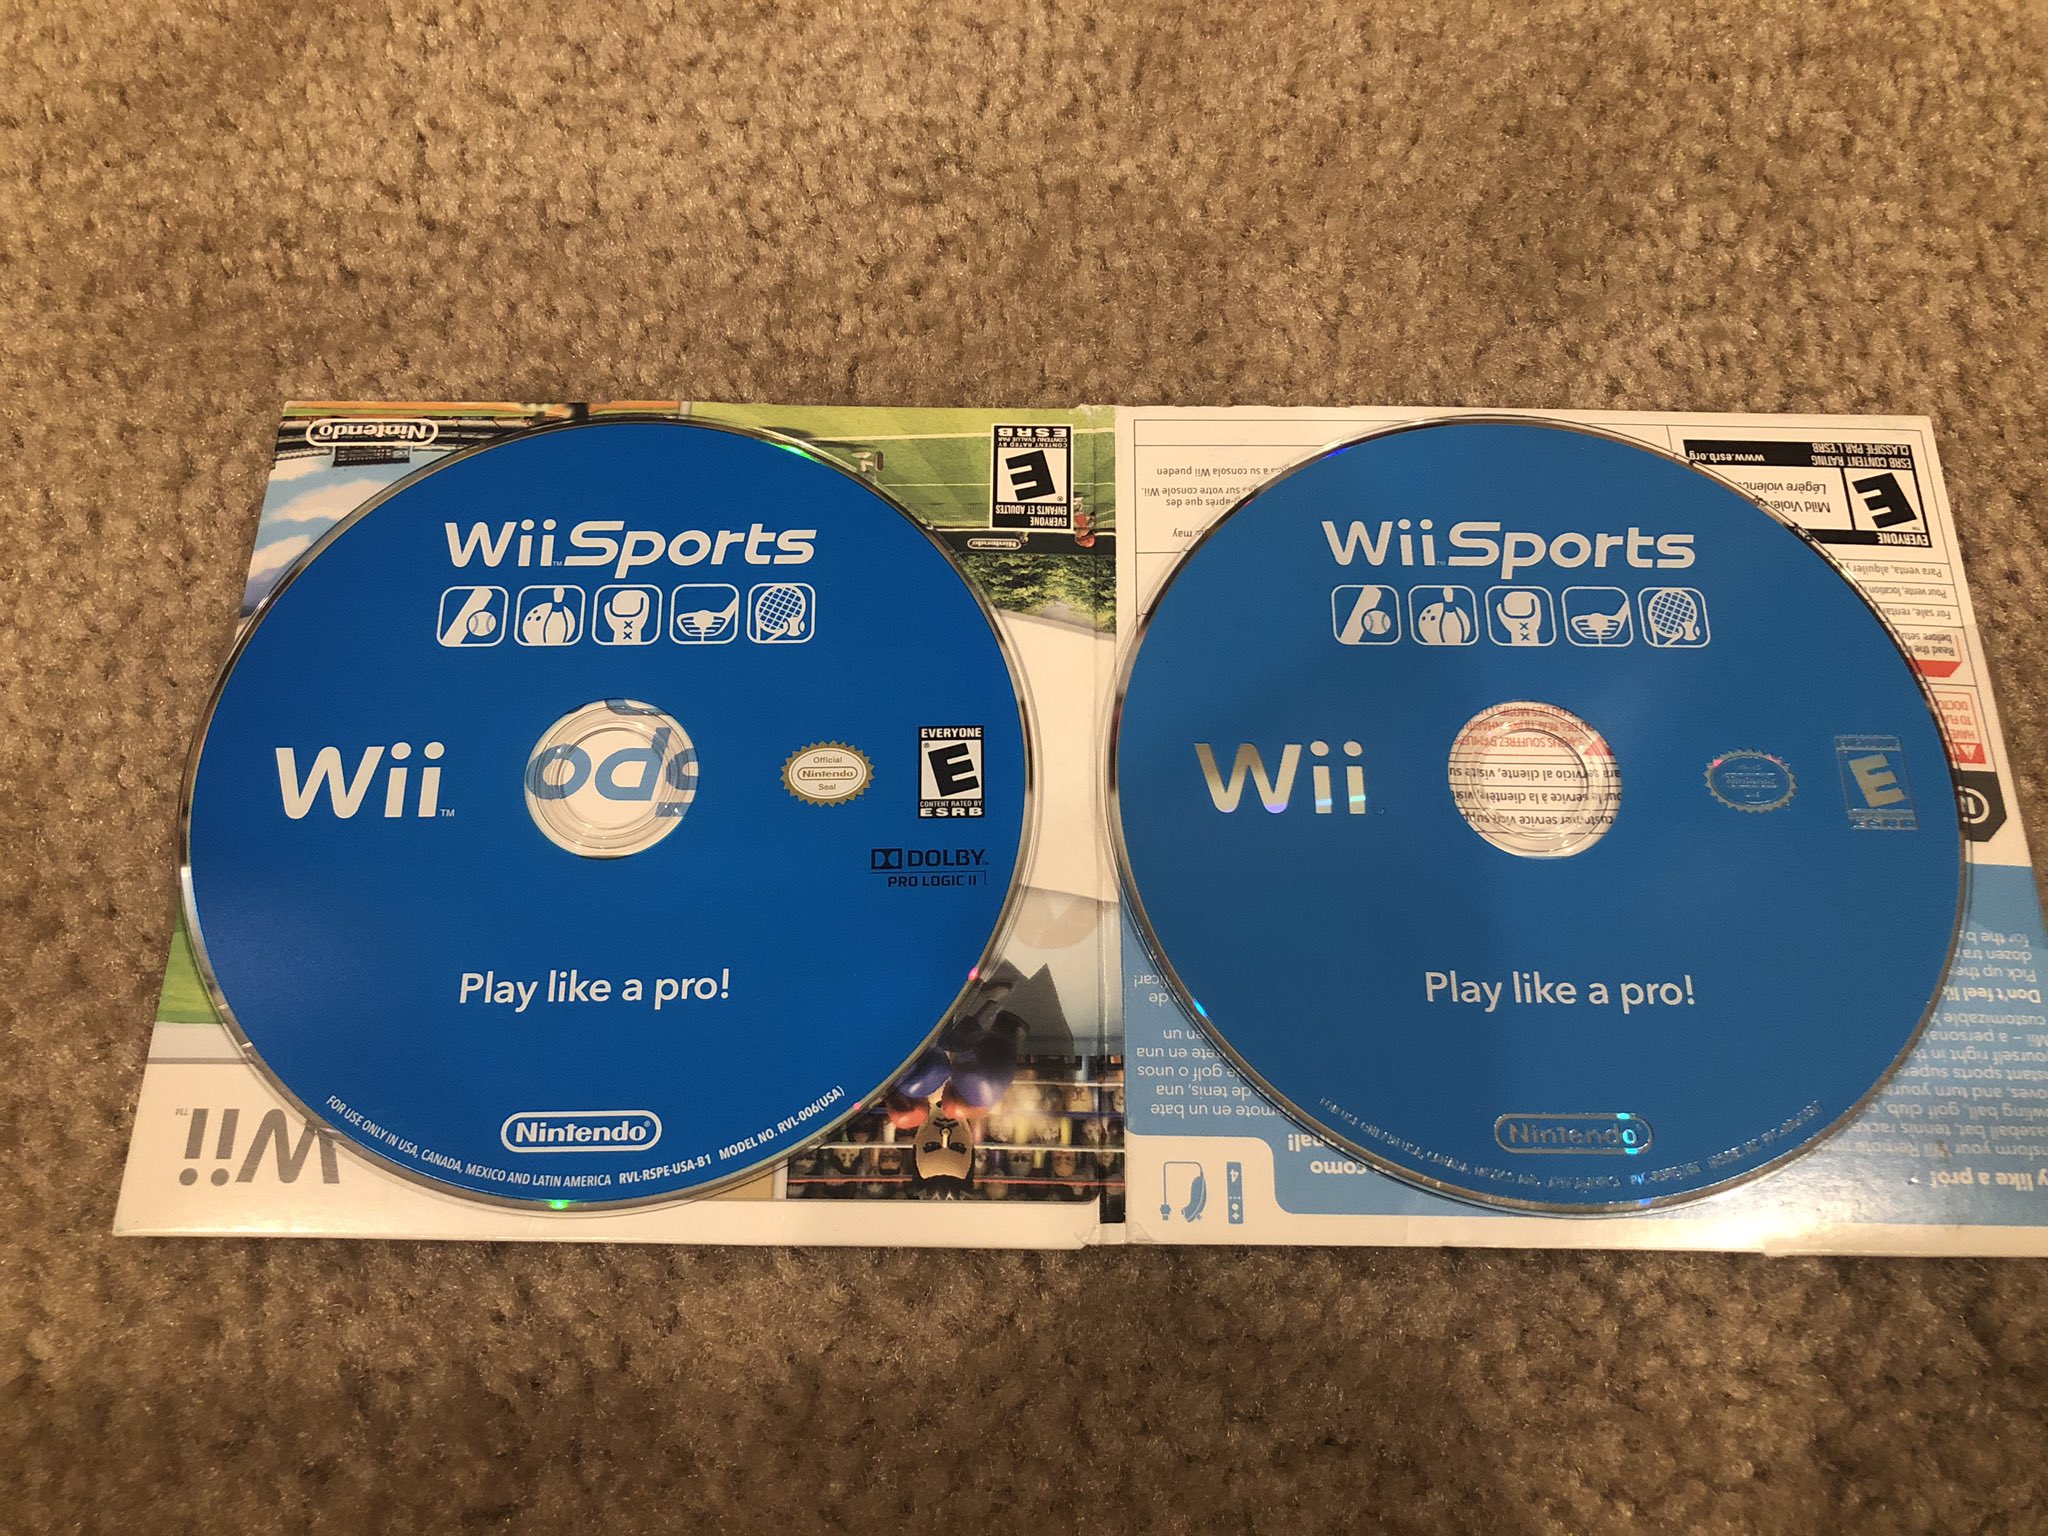 snelweg Recreatie Jumping jack balrog on Twitter: "hmmm... do I play Wii Sports with or without Dolby Pro  Logic II surround sound? https://t.co/Kycry05ZEZ" / Twitter